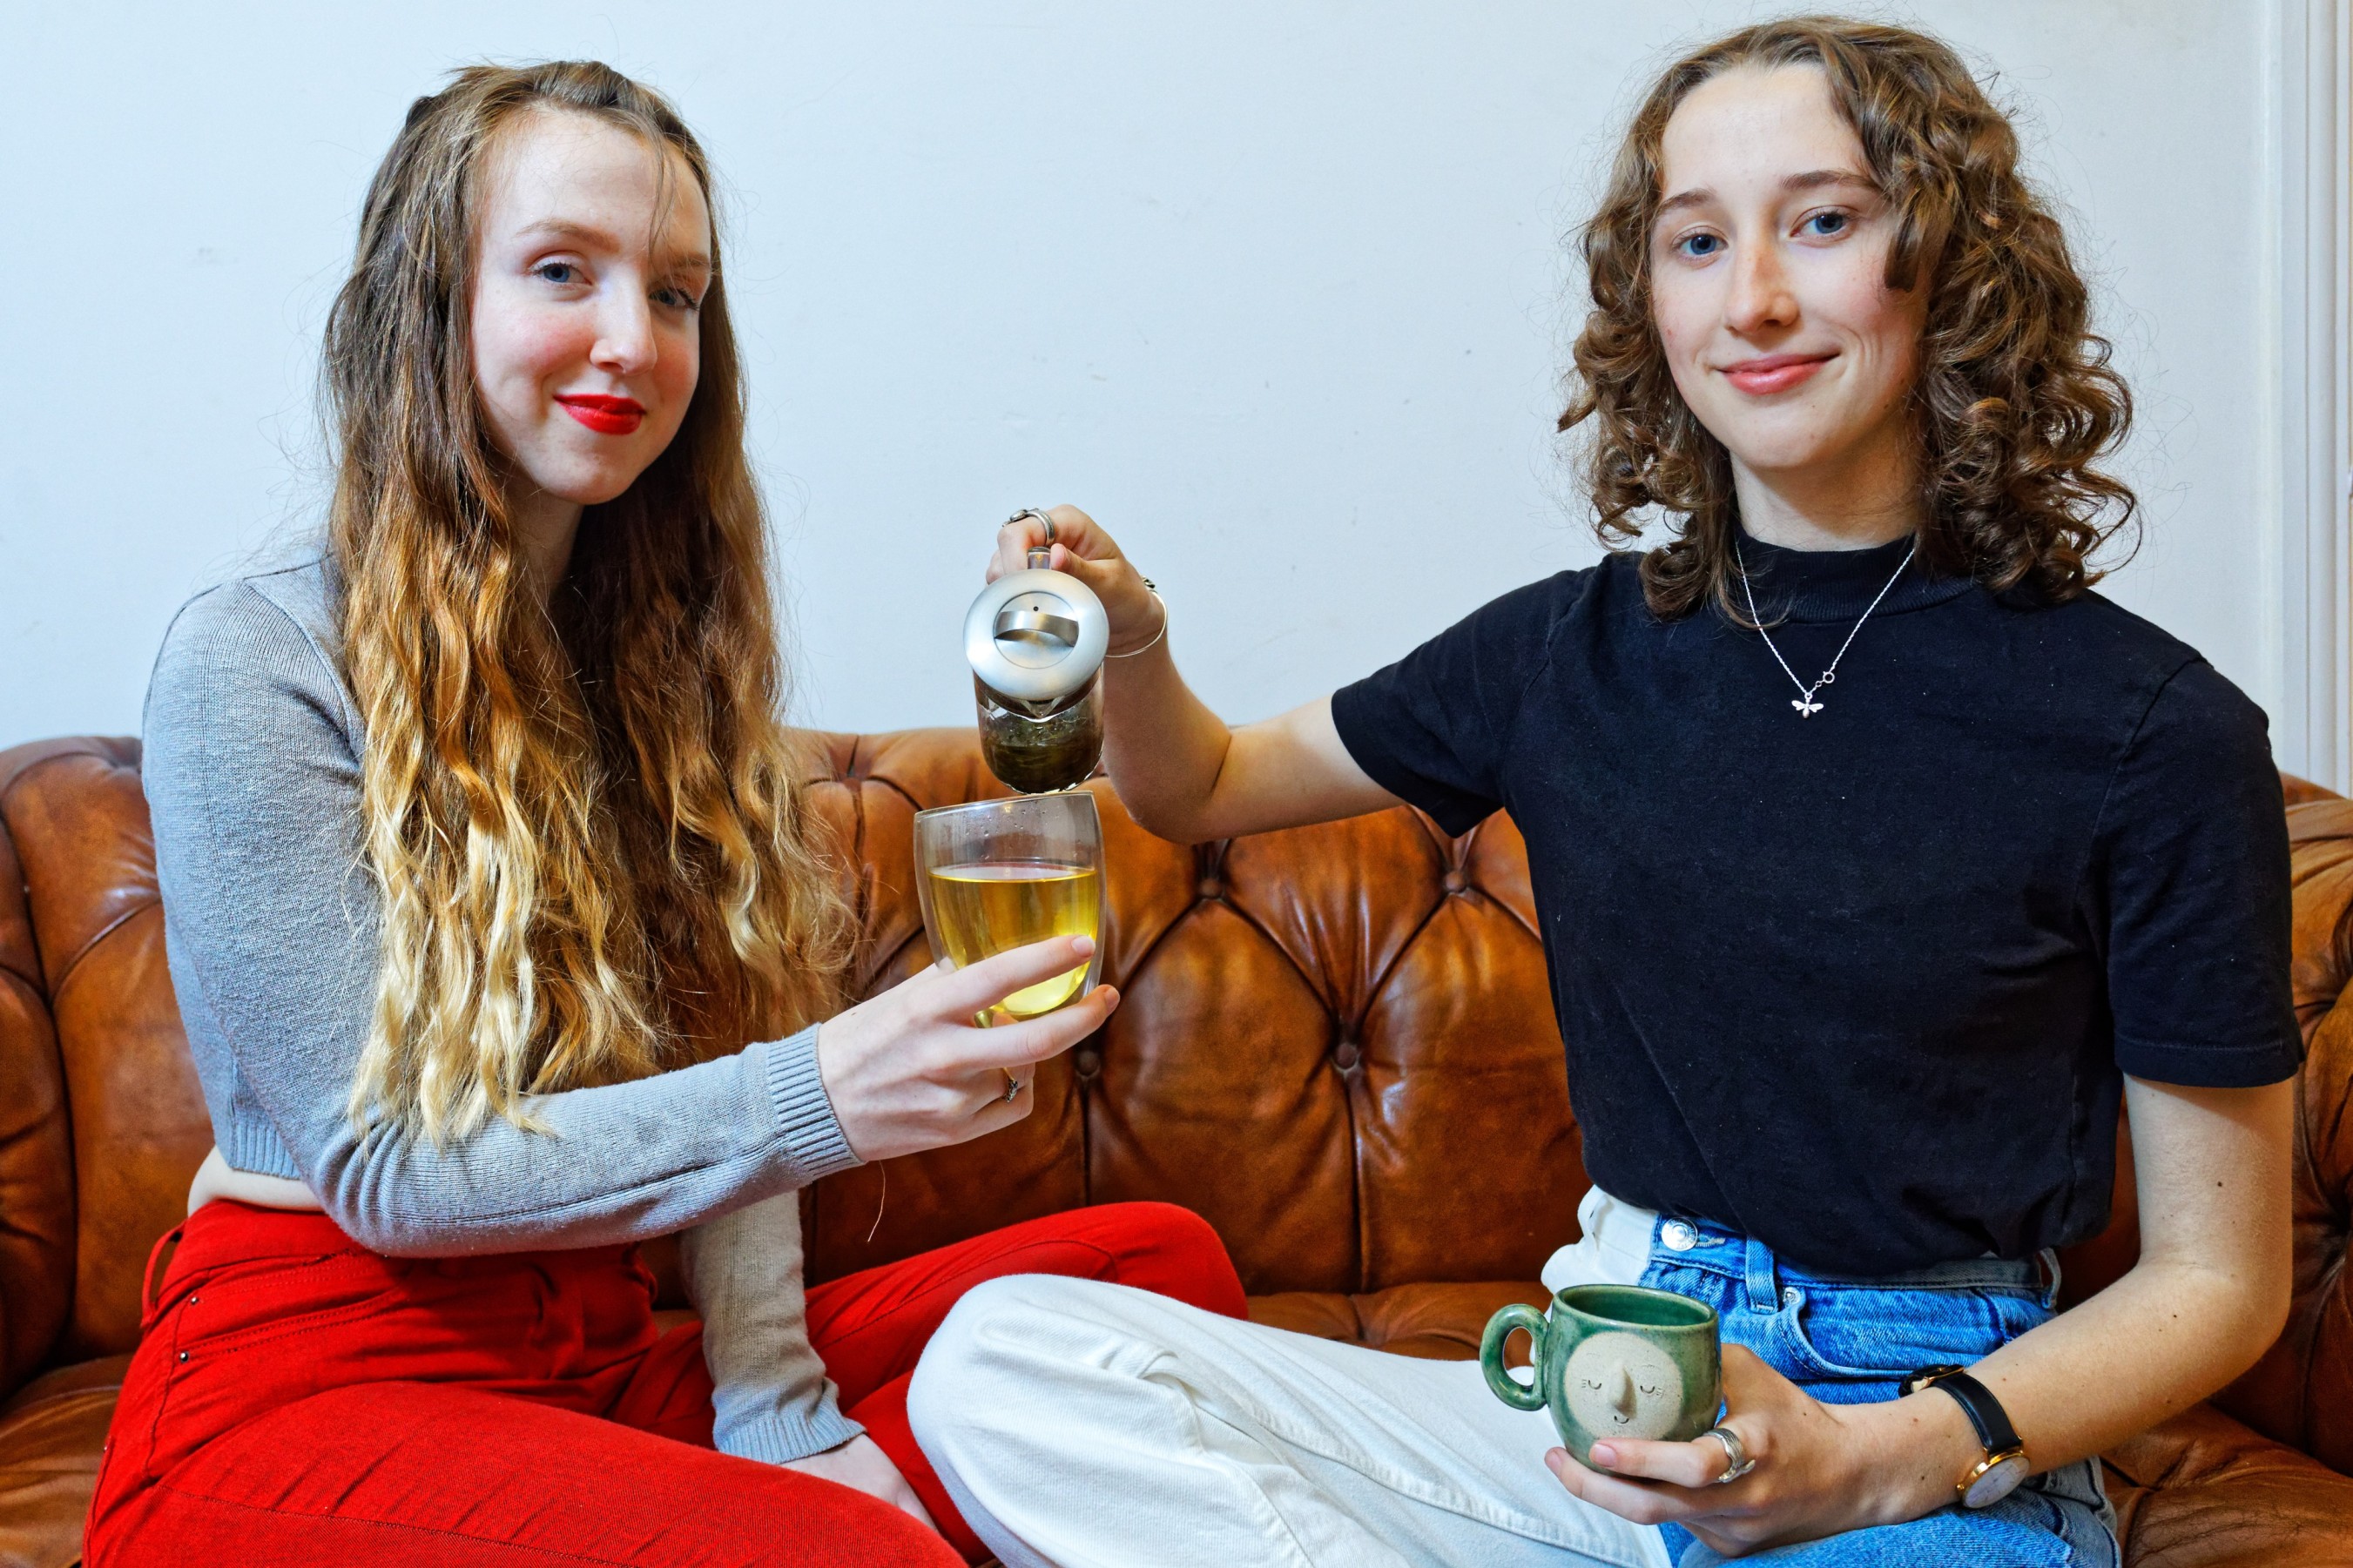 Amy Aed (left) and Emily Knipe (right), EISA Tea co